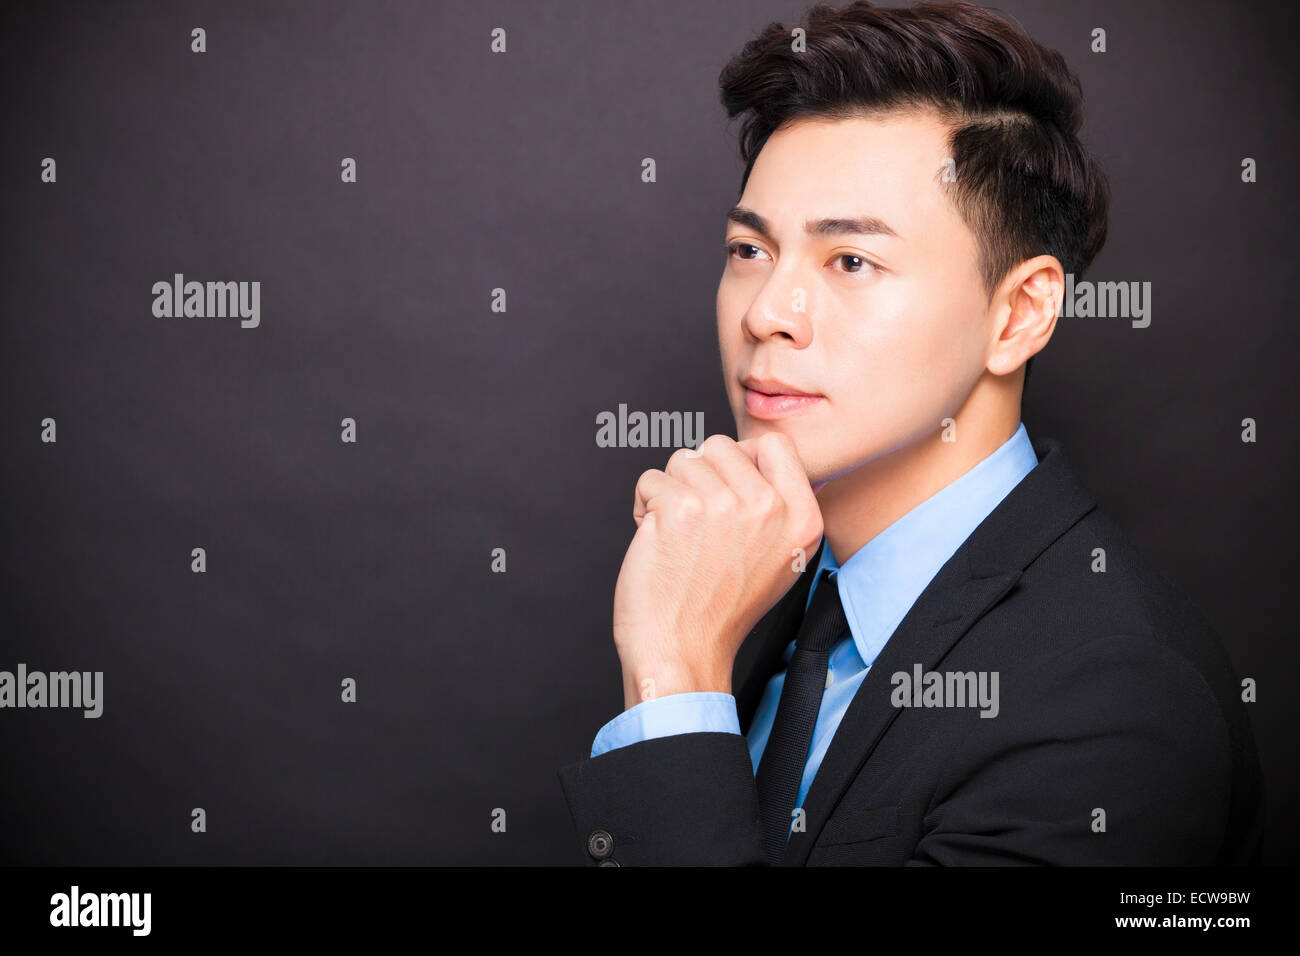 young businessman standing before black background Stock Photo